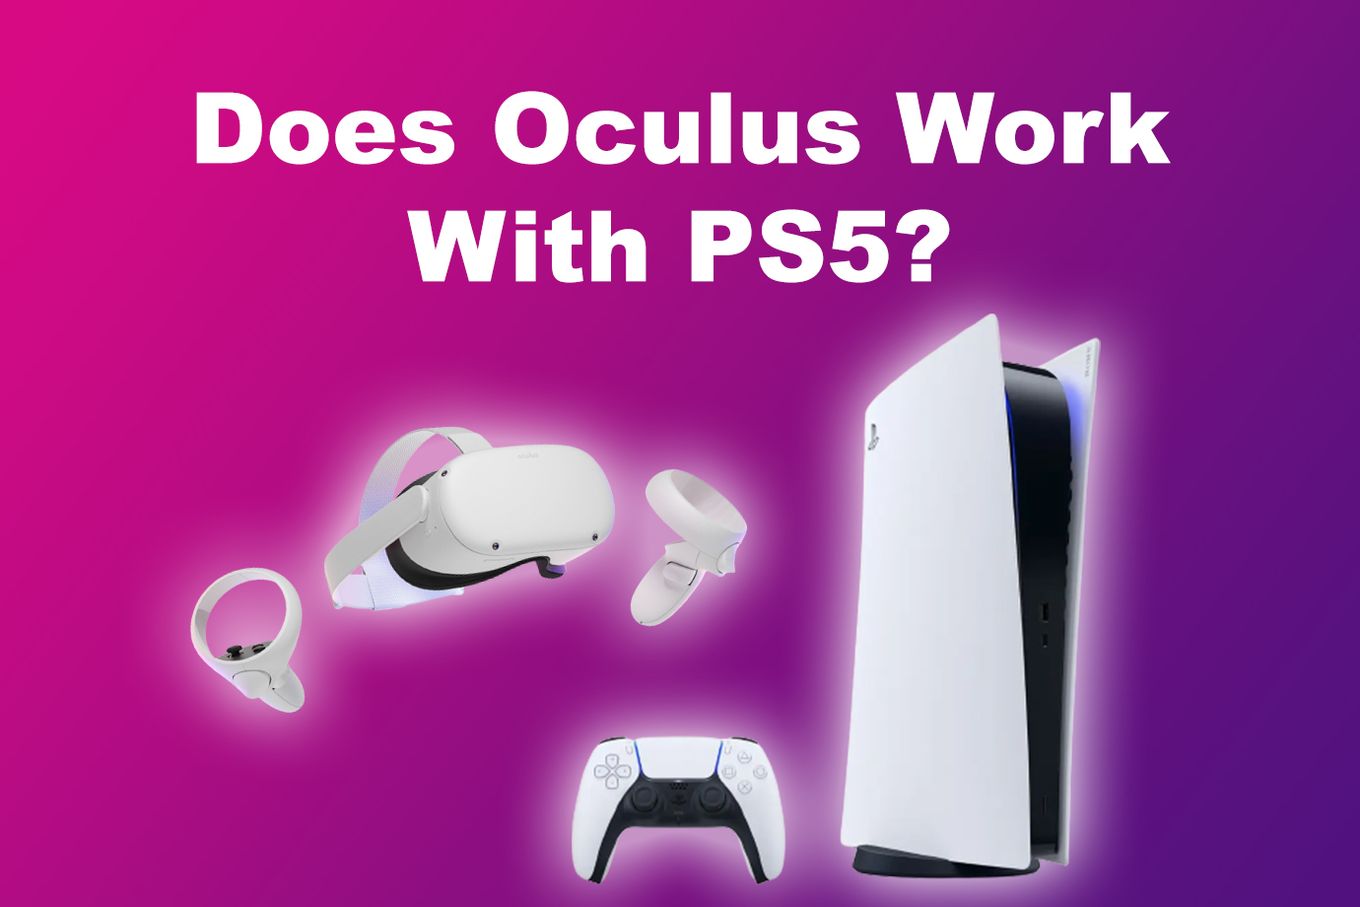 Does Oculus Work with PS5?